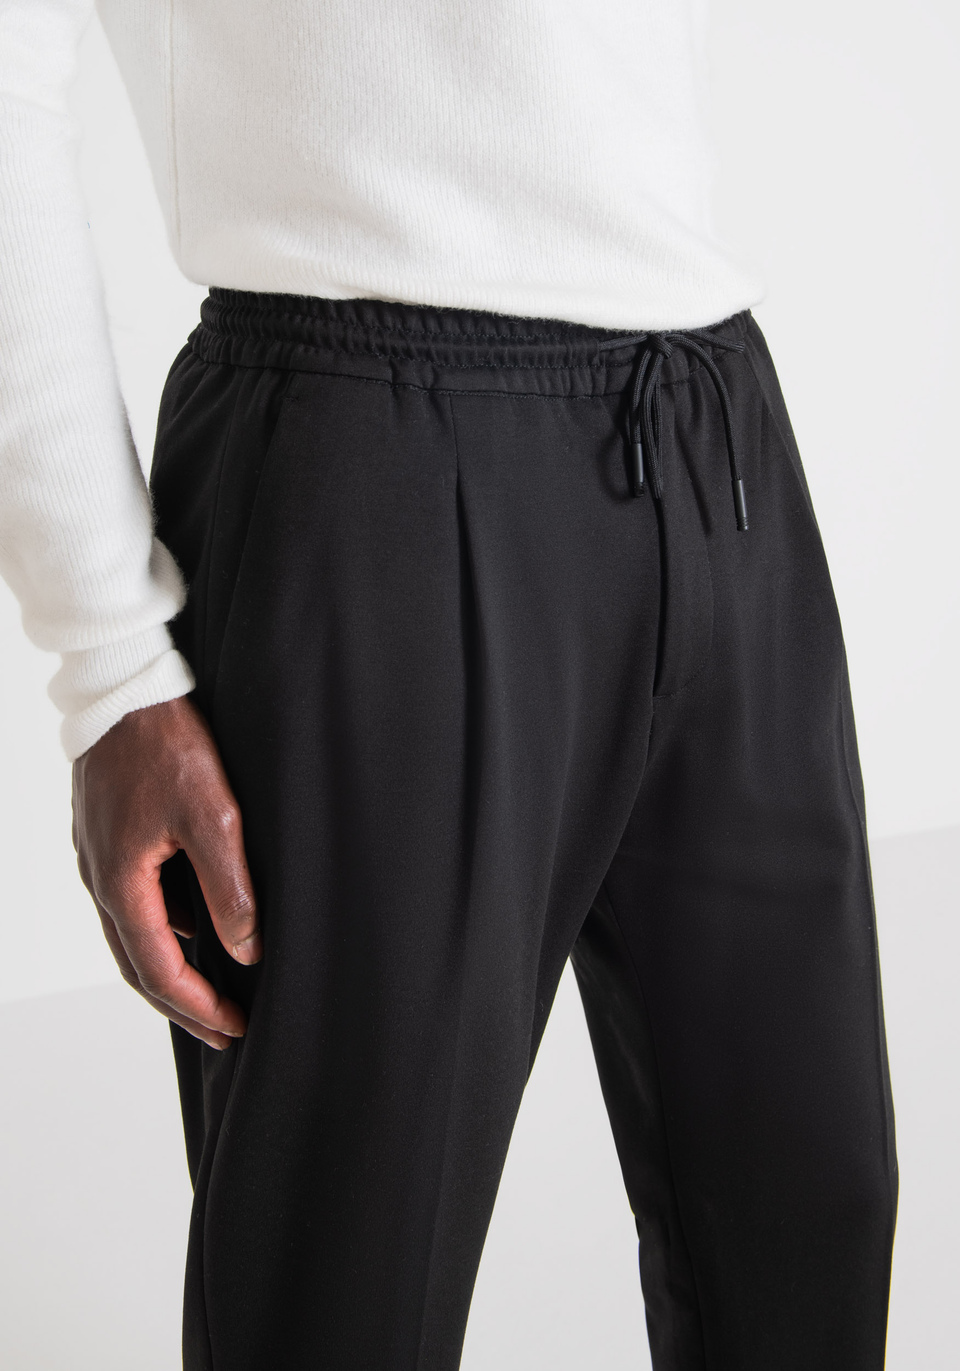 "NEIL" REGULAR FIT TROUSERS IN STRETCH VISCOSE BLEND FABRIC WITH CENTRAL CREASE - Antony Morato Online Shop